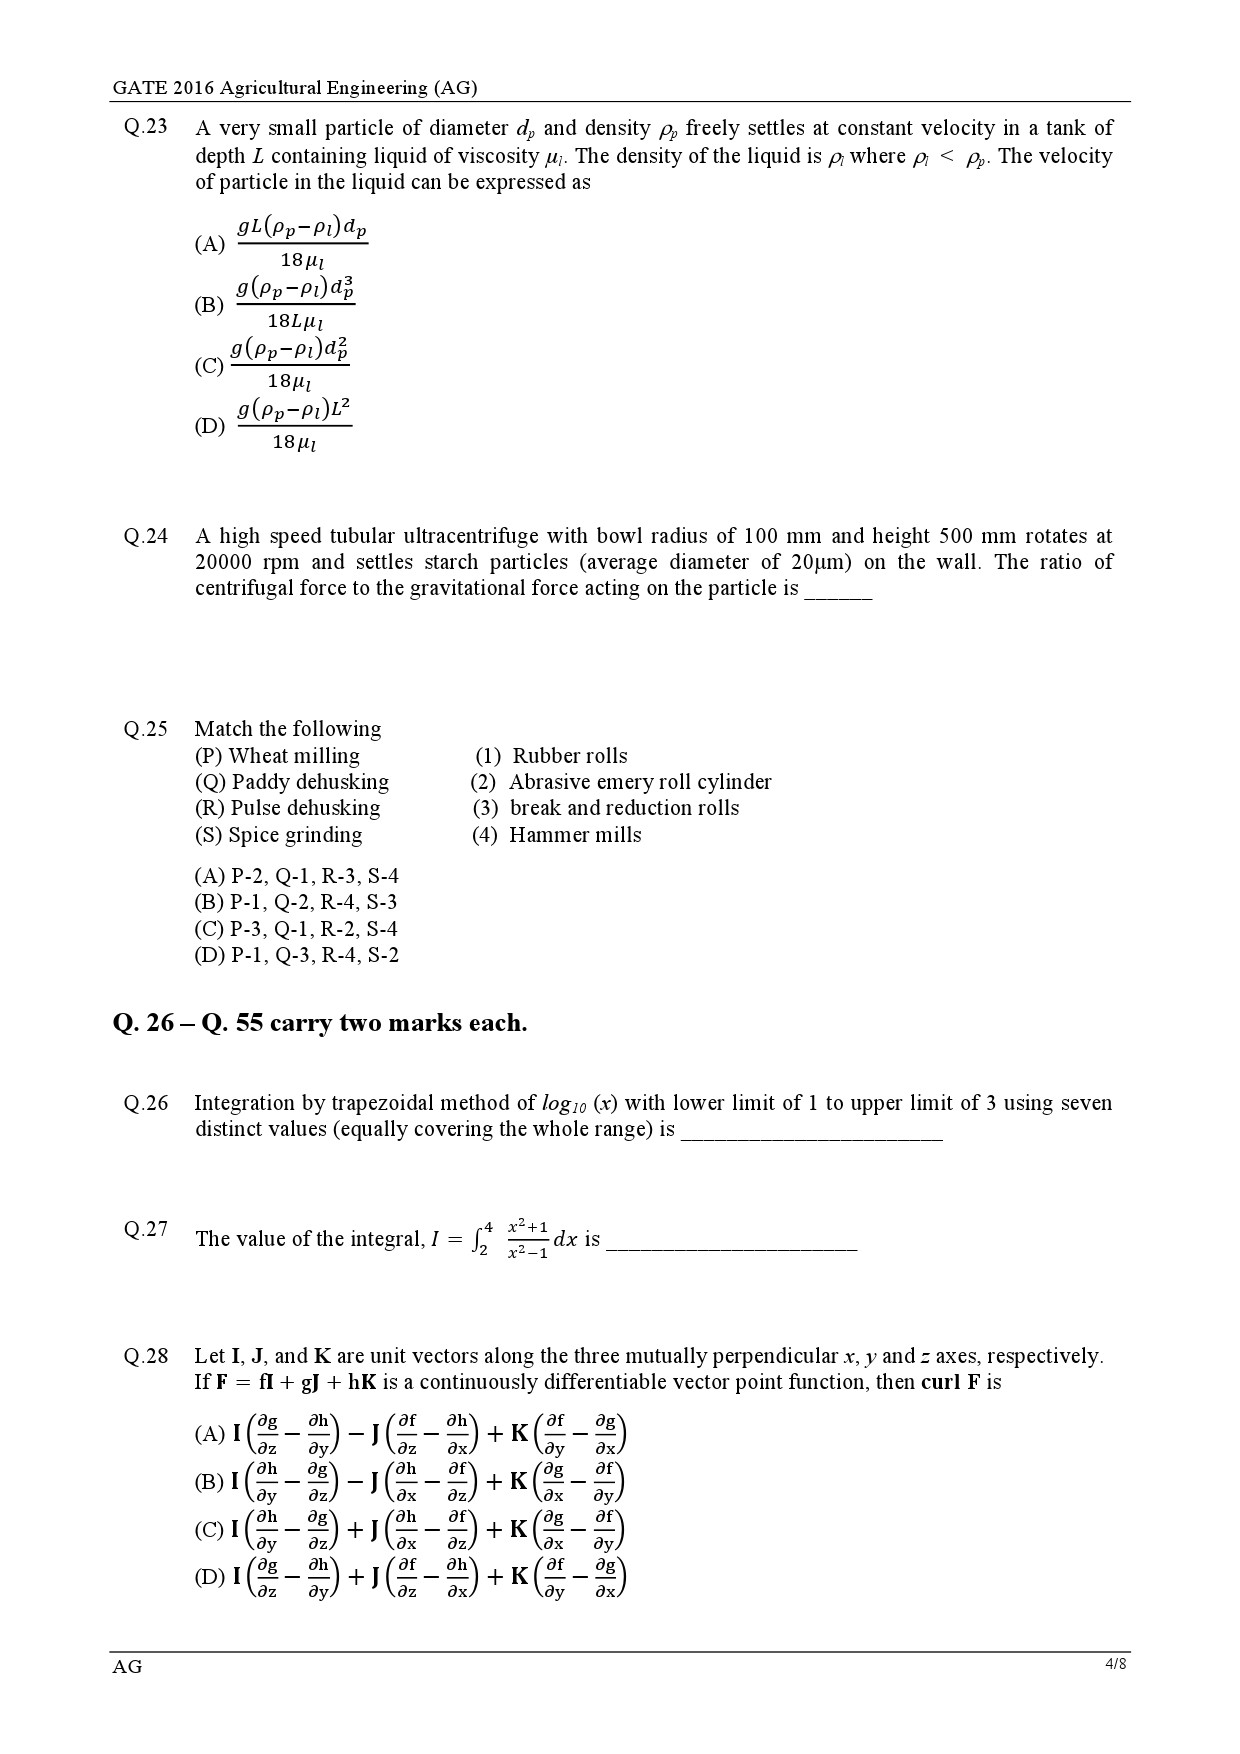 GATE Exam Question Paper 2016 Agricultural Engineering 4